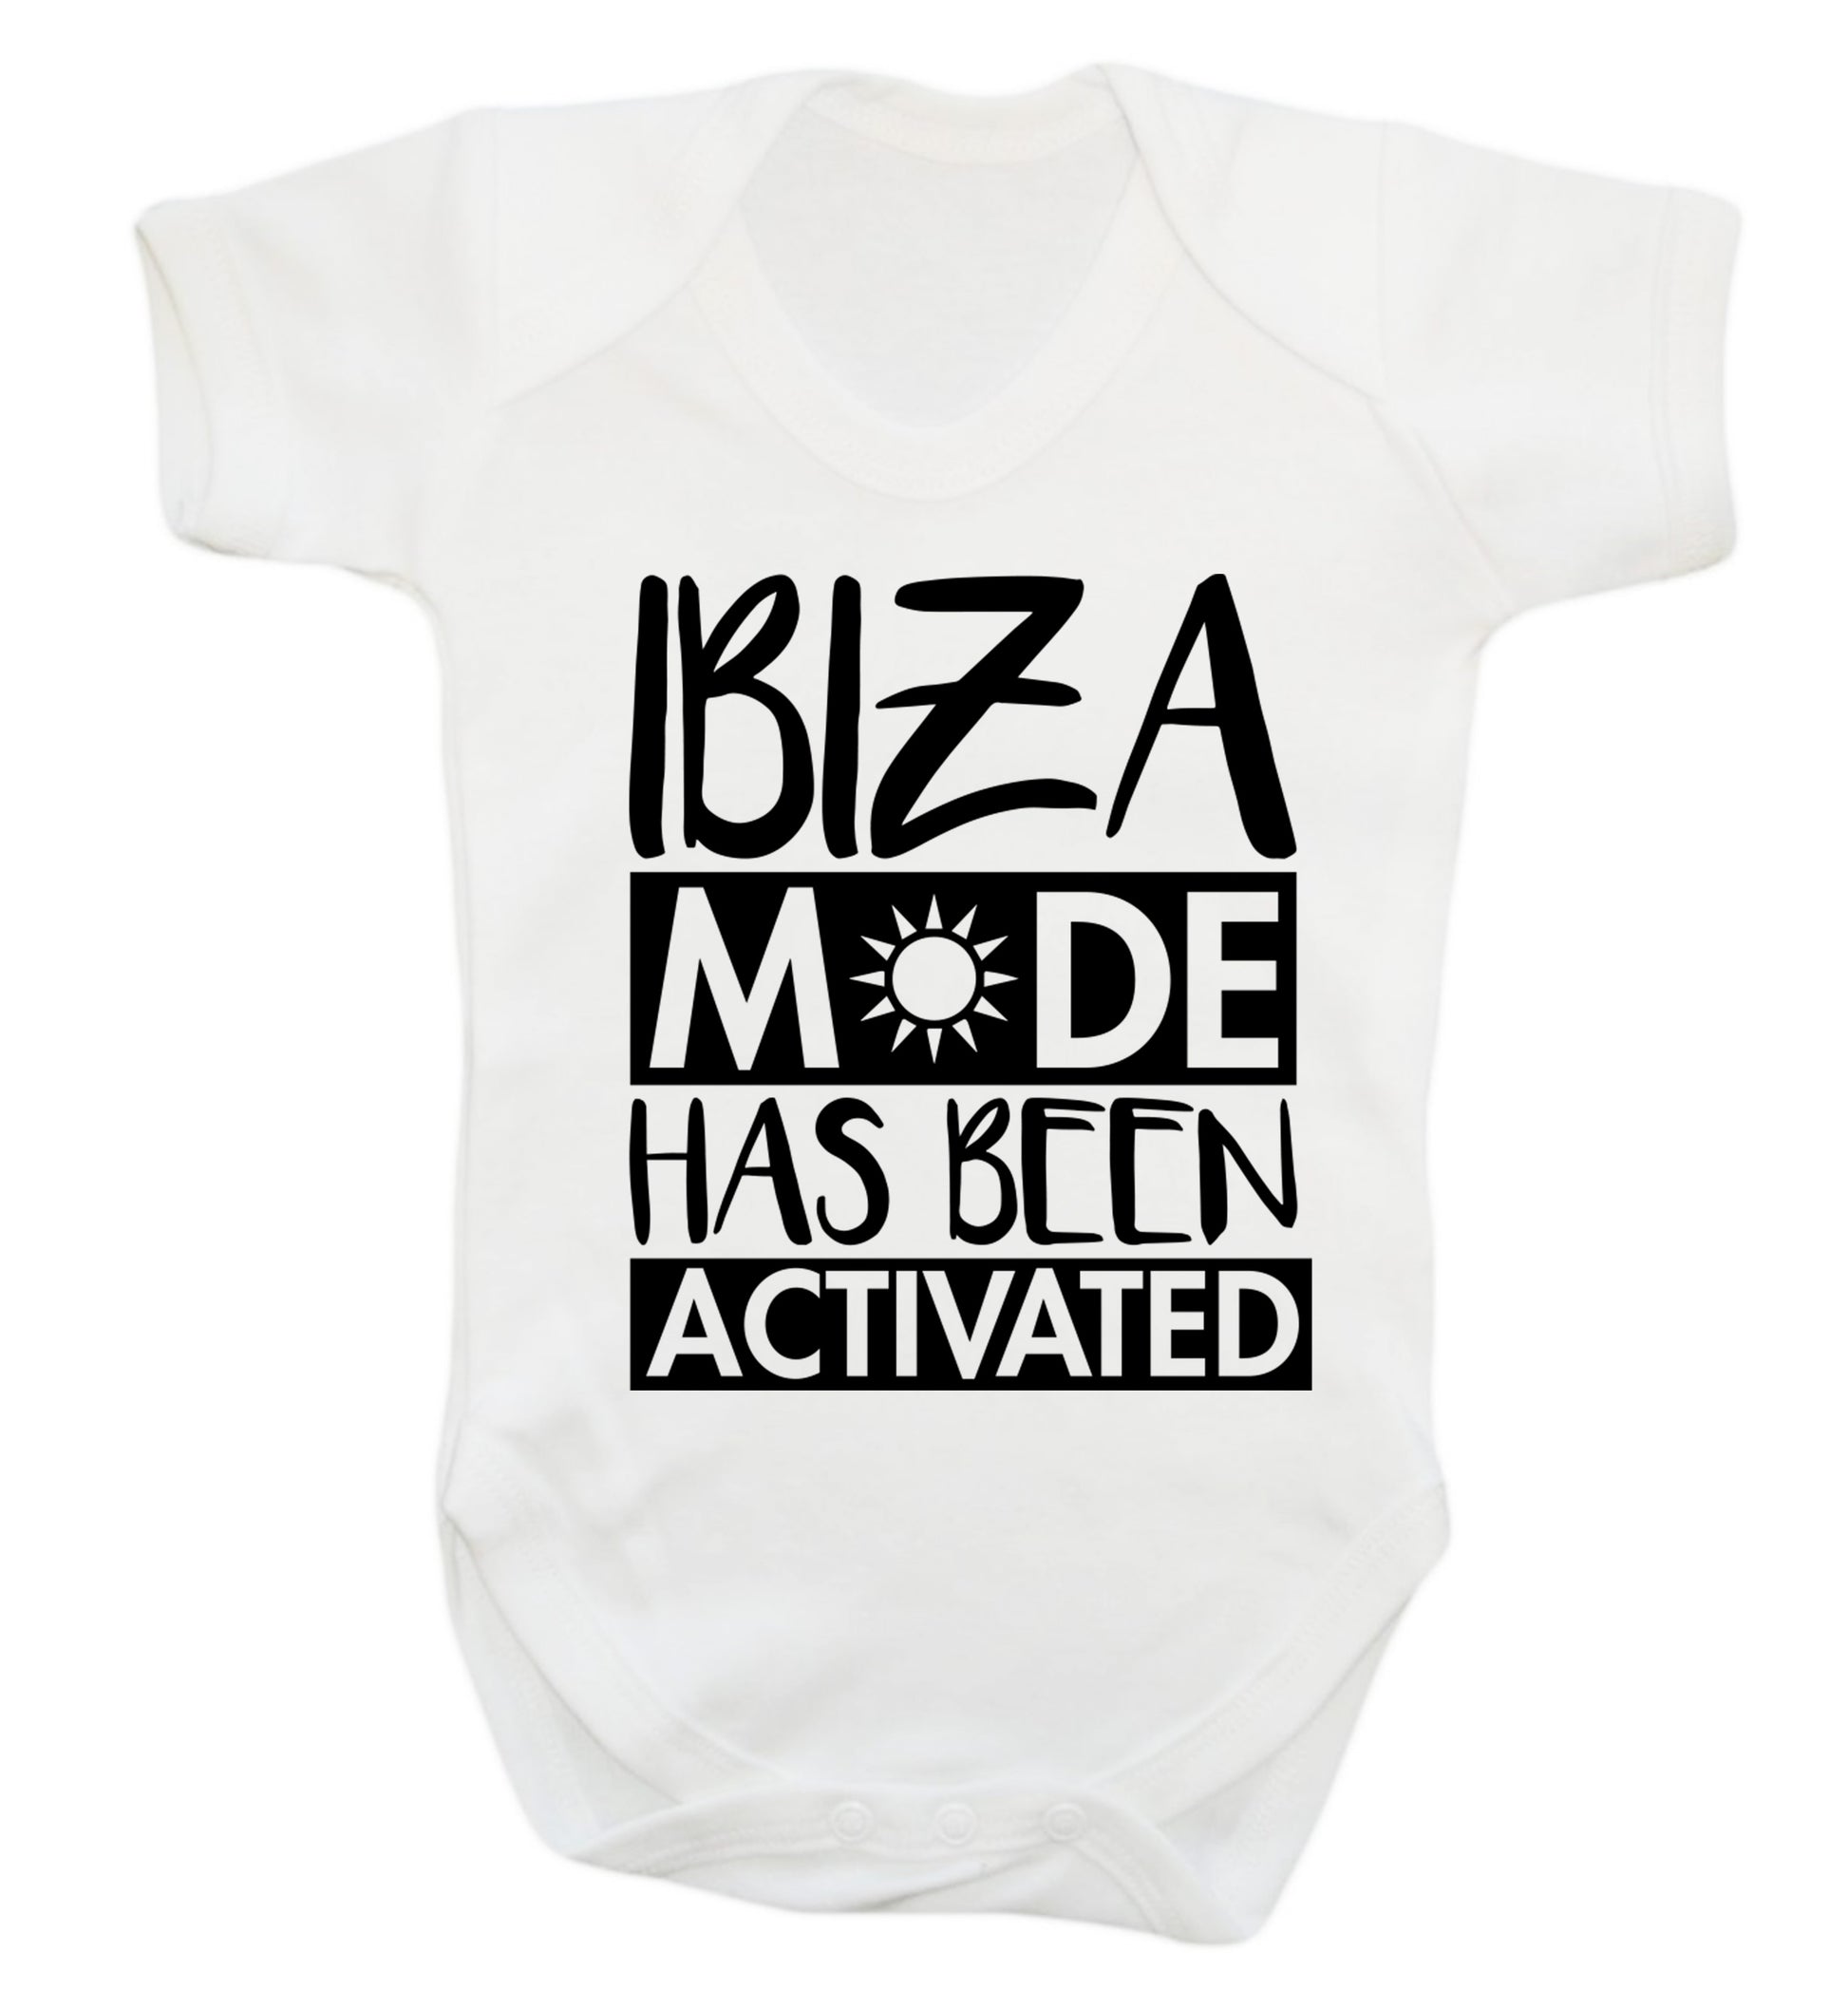 Ibiza mode has been activated Baby Vest white 18-24 months